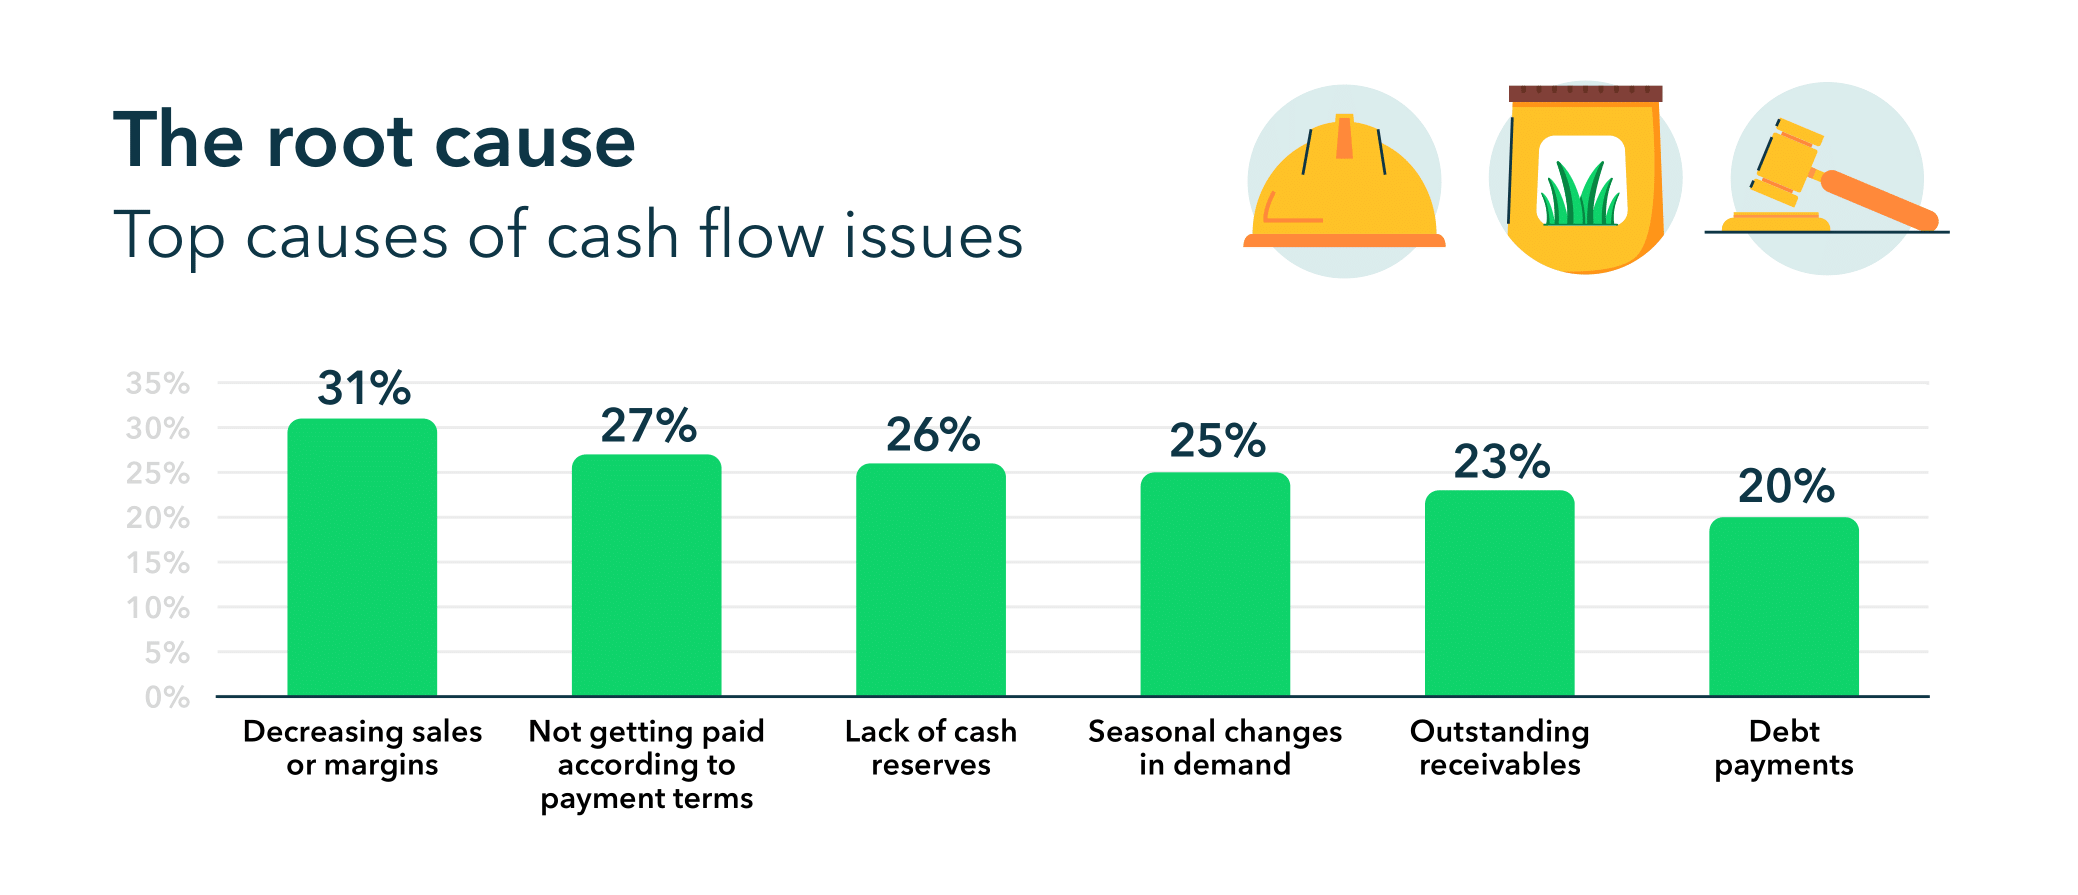 Top causes of cash flow issues: decreasing sales or margins (31%), not getting paid according to payment terms (27%), lack of cash reserves (26%), seasonal changes in demand (25%), outstanding receivables (23%), debt payments (20%).